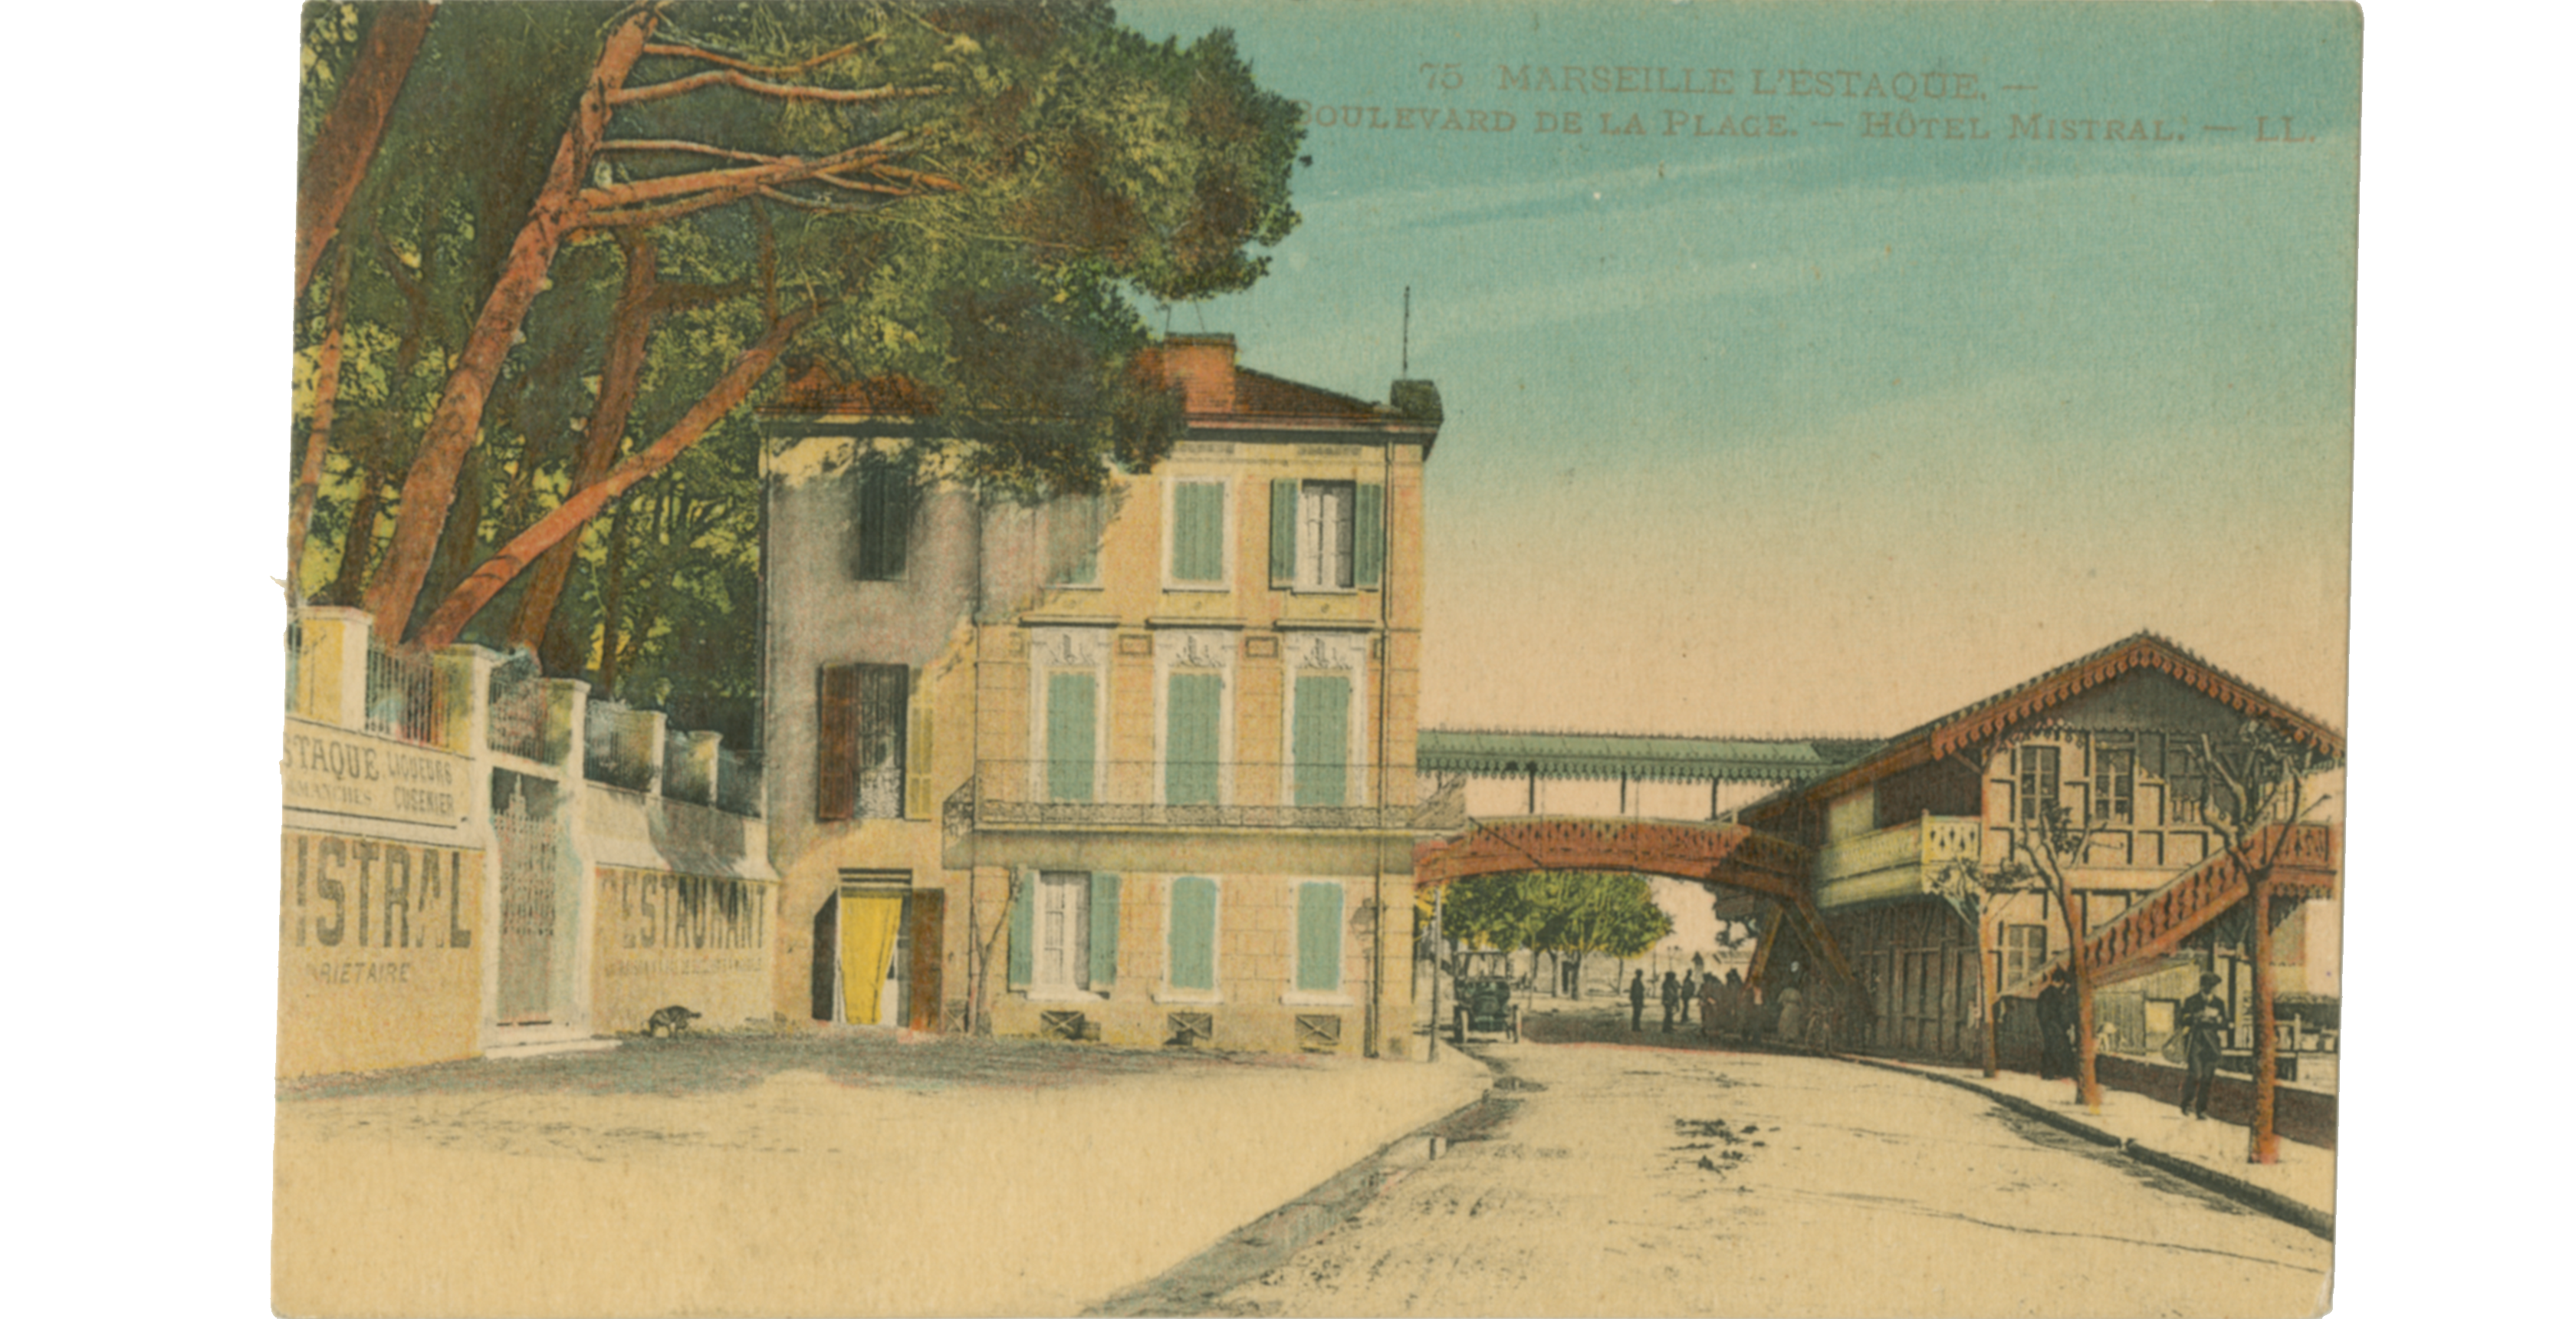 Drawn postcard of the Hôtel Mistral on a quiet street with many trees and and clear skies